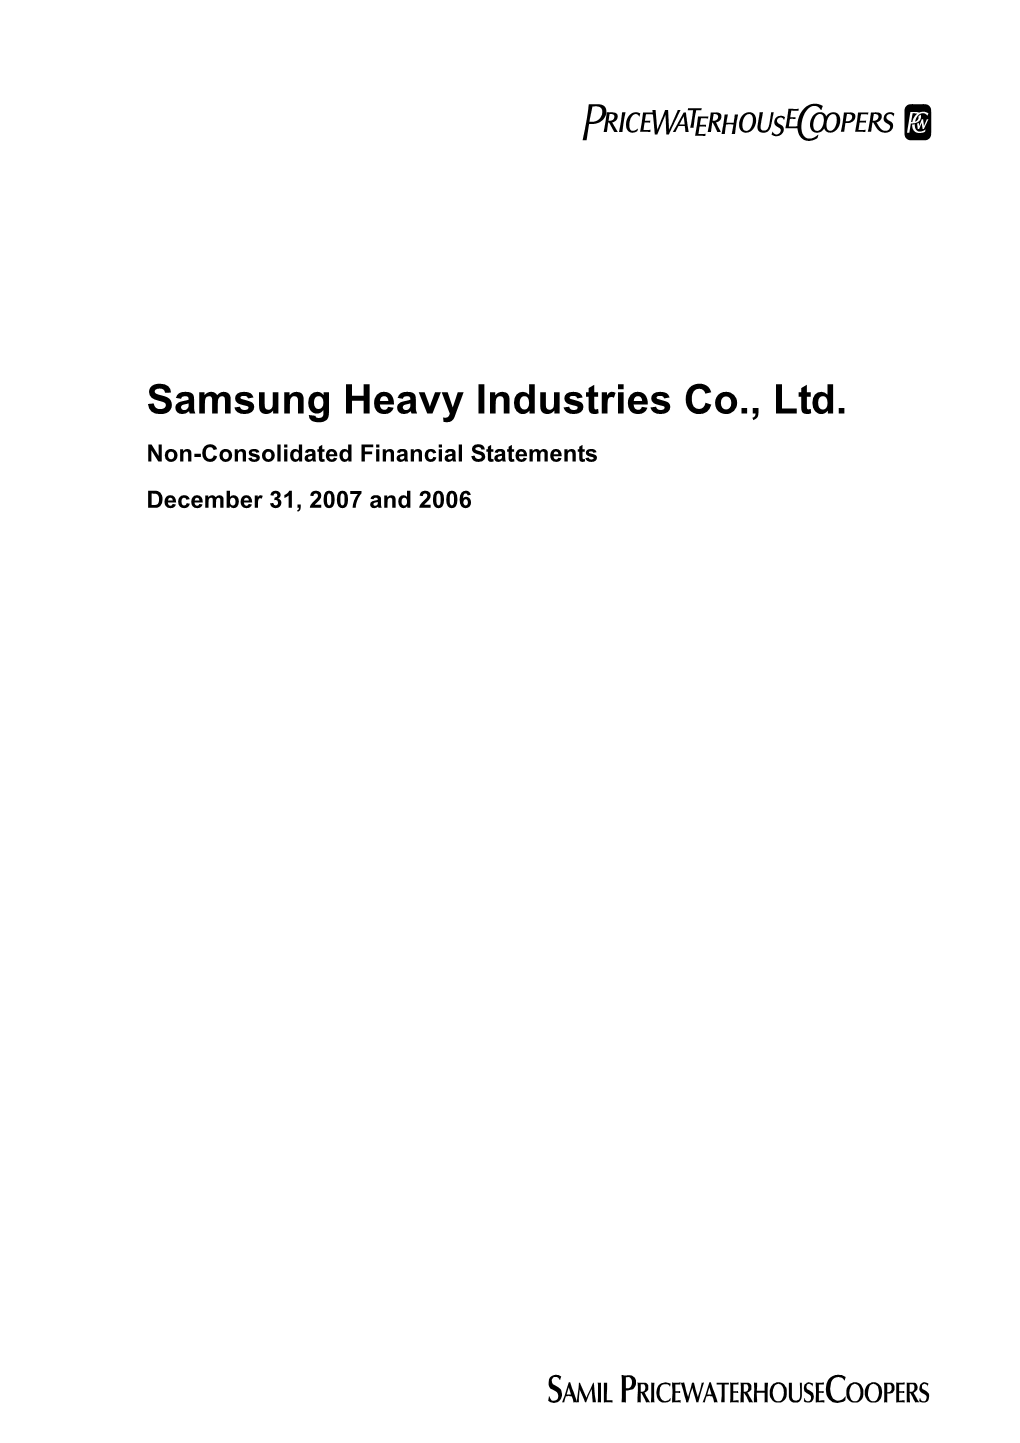 Samsung Heavy Industries Co., Ltd. Non-Consolidated Financial Statements December 31, 2007 and 2006